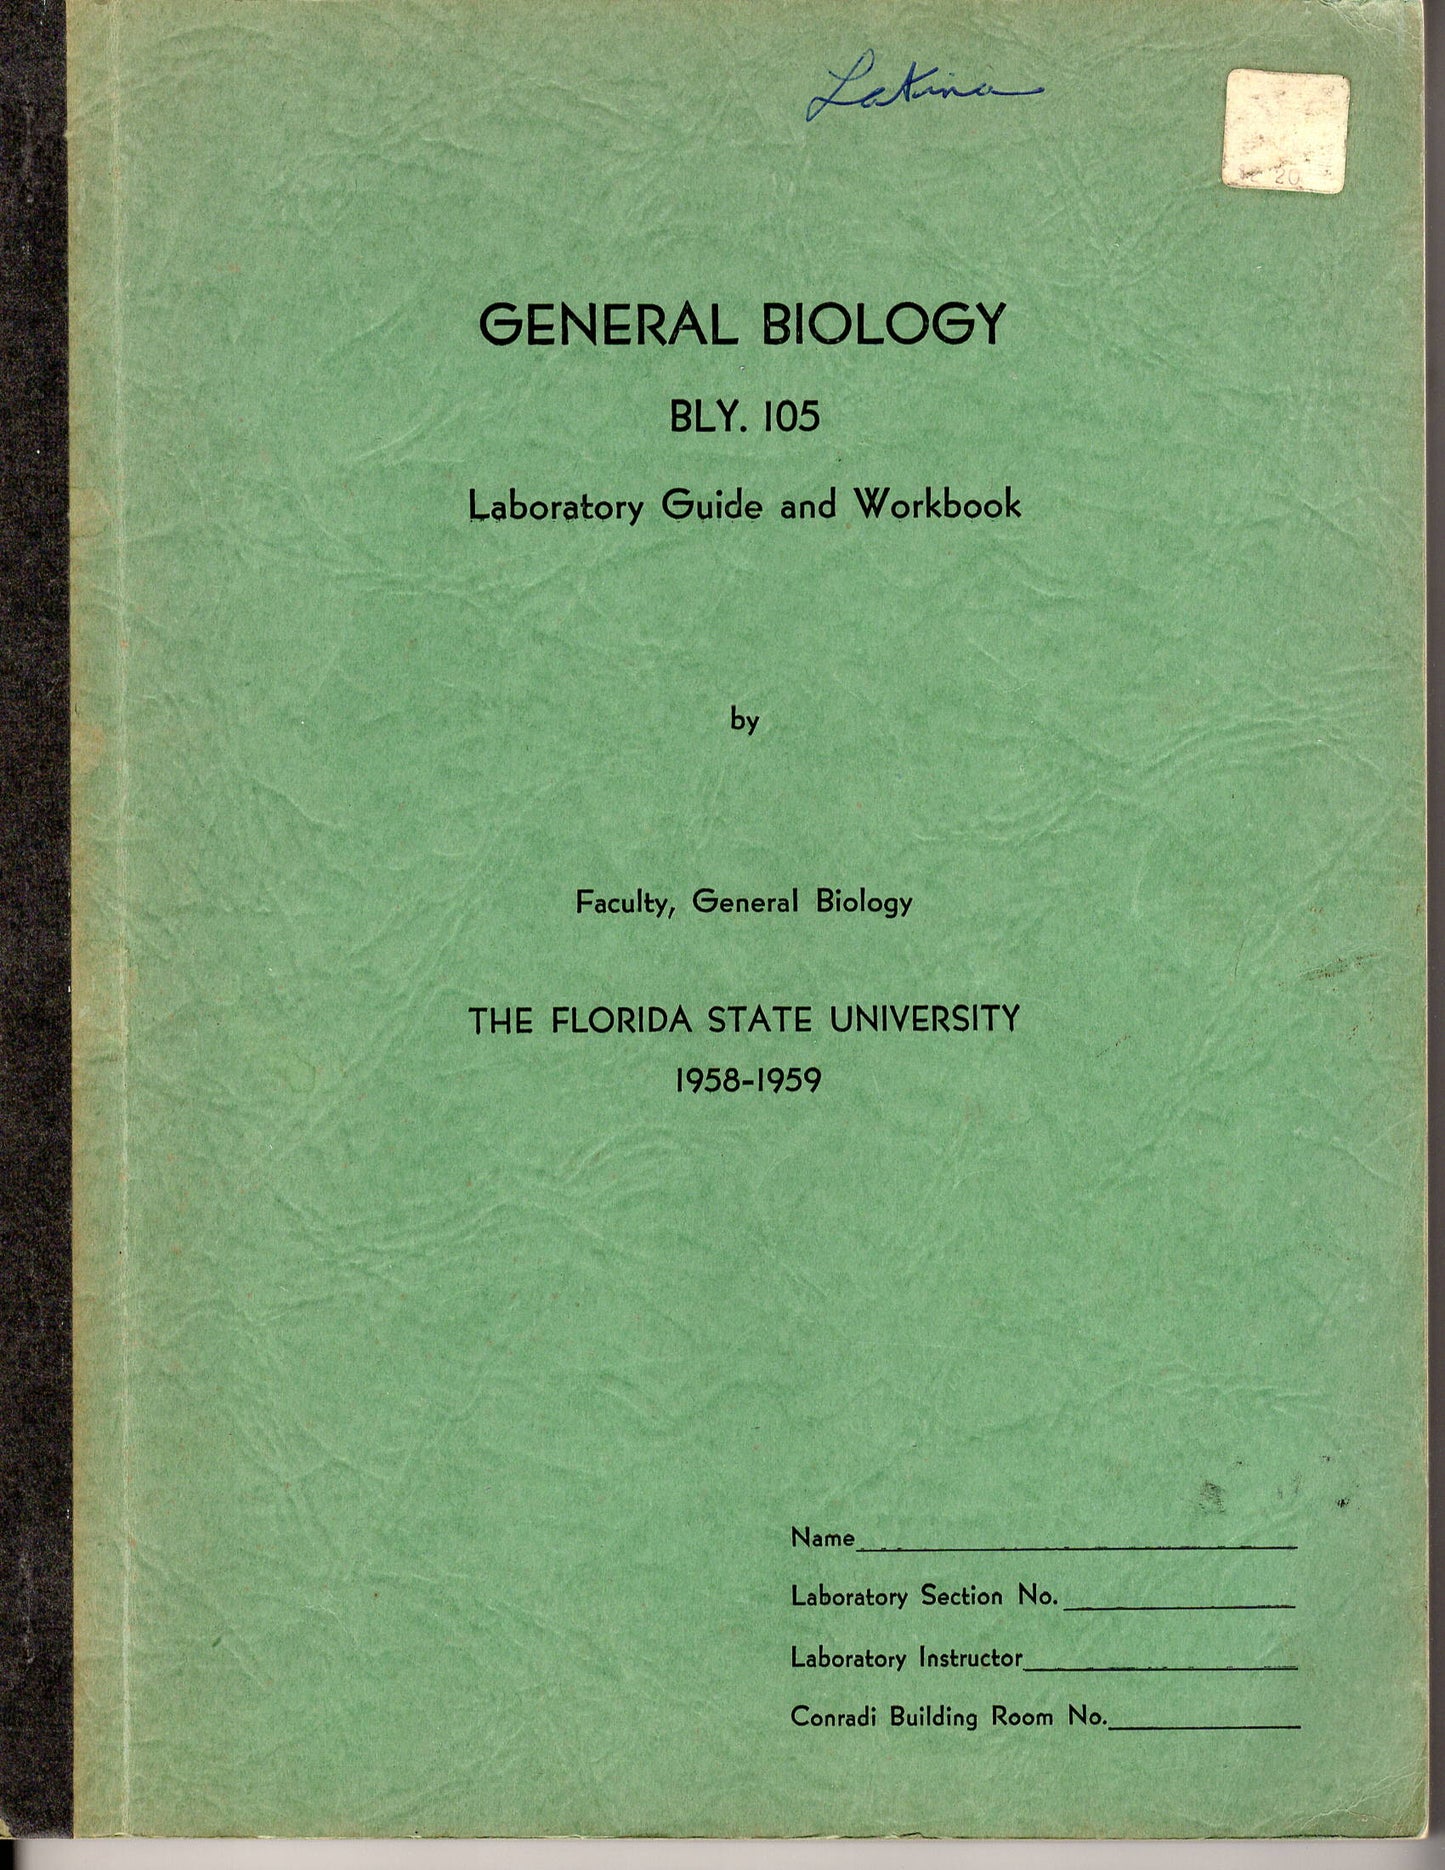 1958 FL State University - General Biology Lab Guide and Workbook